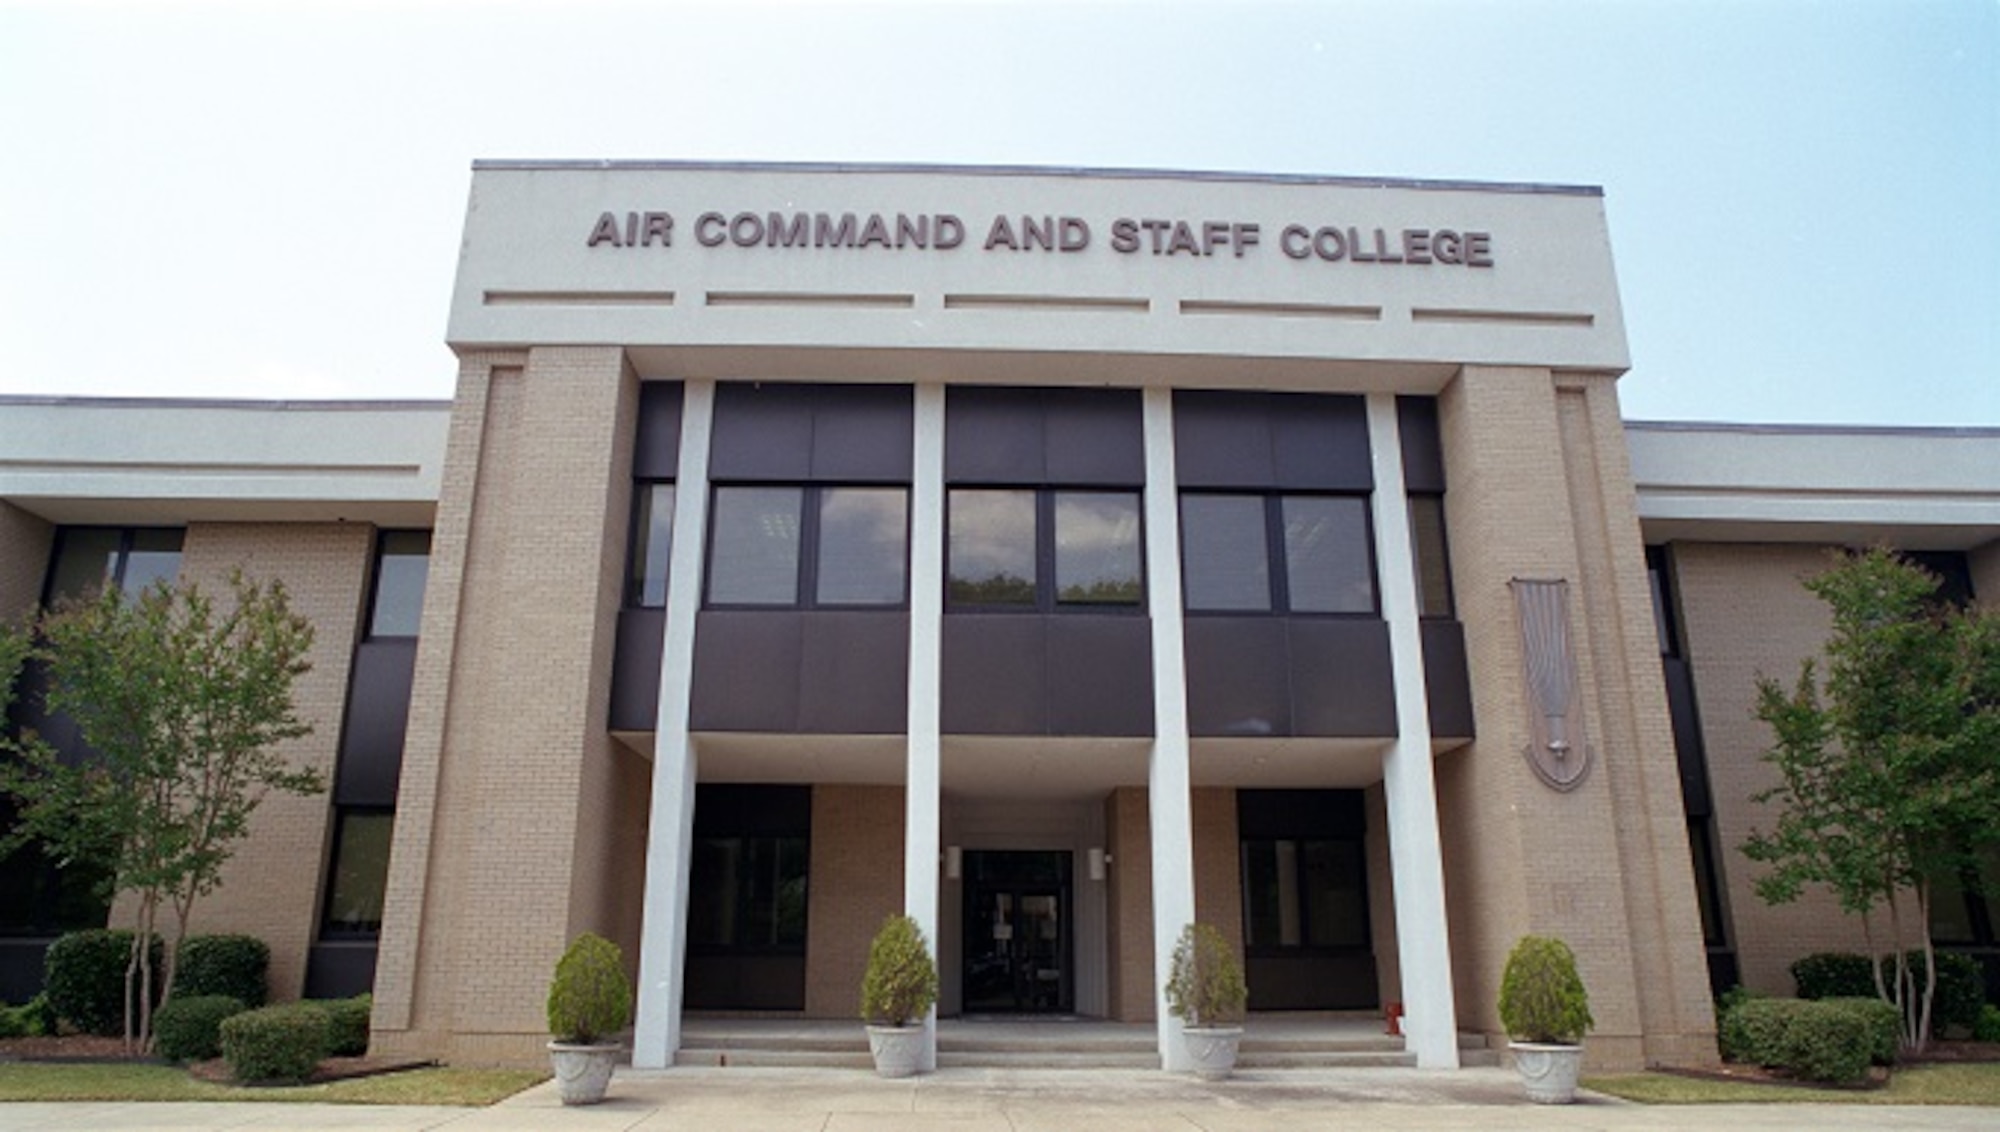 21st Century Leaders for 21st Century Challenges.

The United States Air Force Air Command and Staff College is the intermediate Air Force professional military school. Annually, we prepare about 600 resident and over 9,000 nonresident students from all US military services, federal agencies, and over 70 partner nations to lead in the operational environment - emphasizing the employment of airpower in joint operations.

For more information visit https://www.airuniversity.af.edu/ACSC/